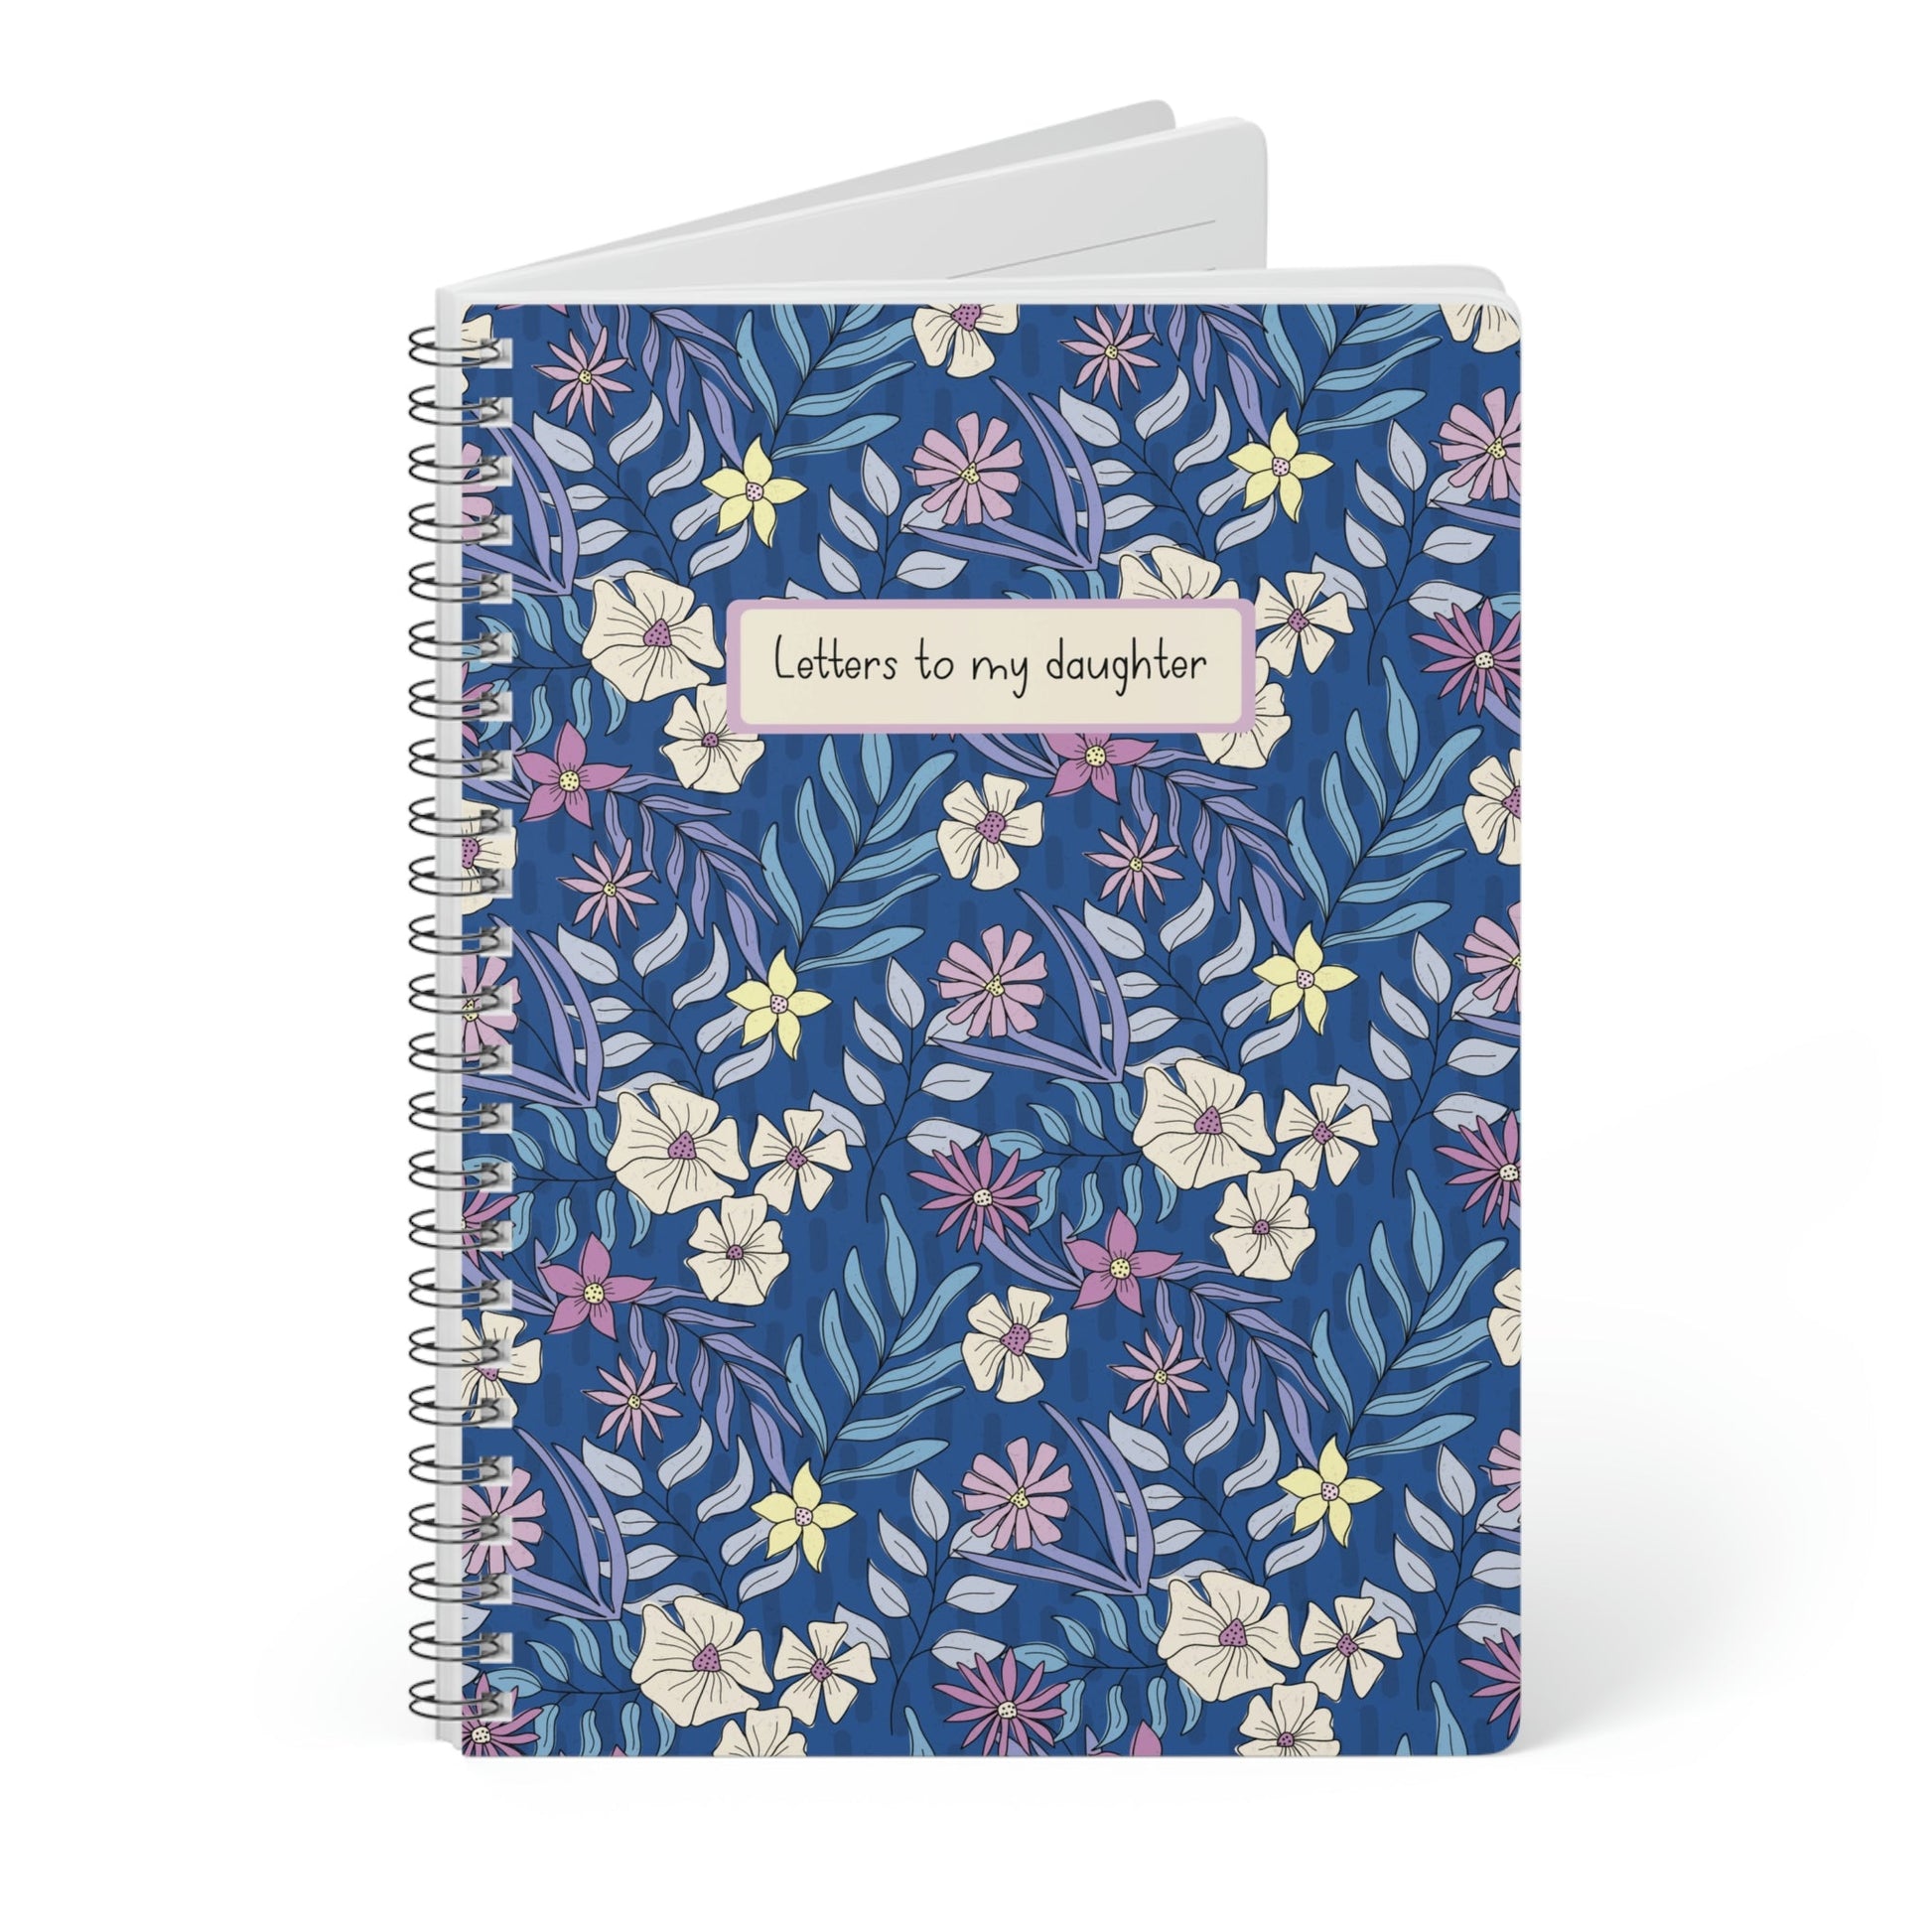 Letters for my daughter floral notebook - Dolly and Fred Designs